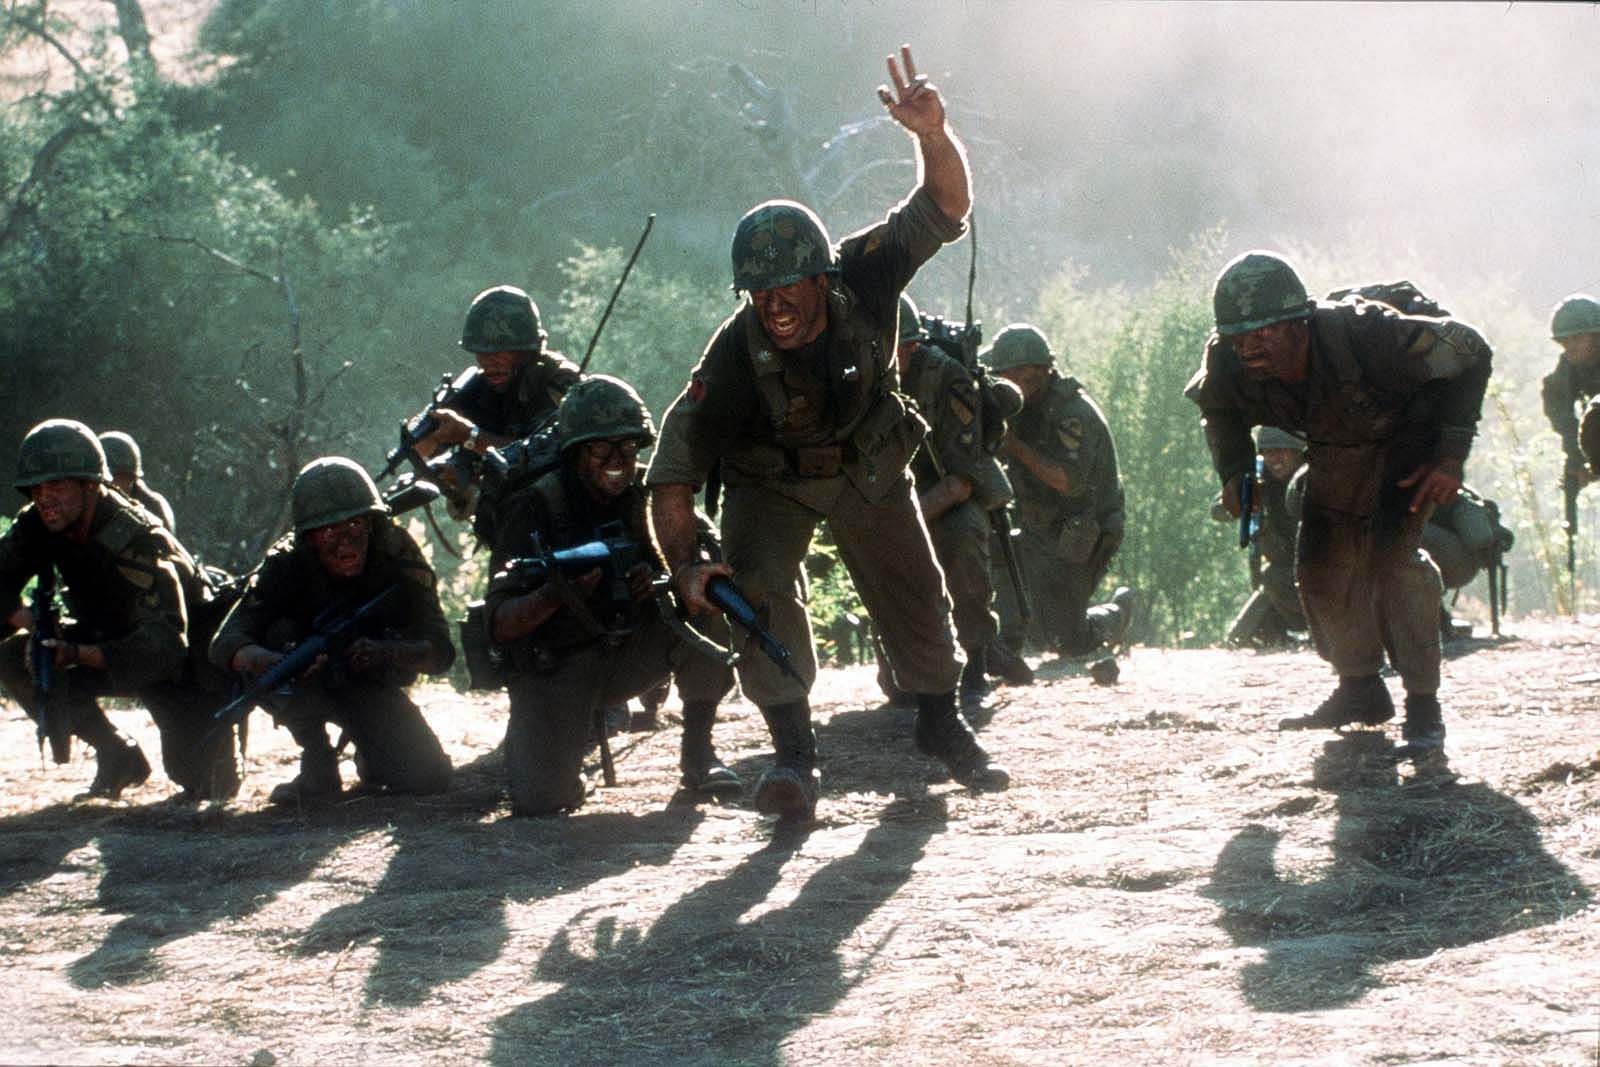 We Were Soldiers (Image via Paramount Pictures)